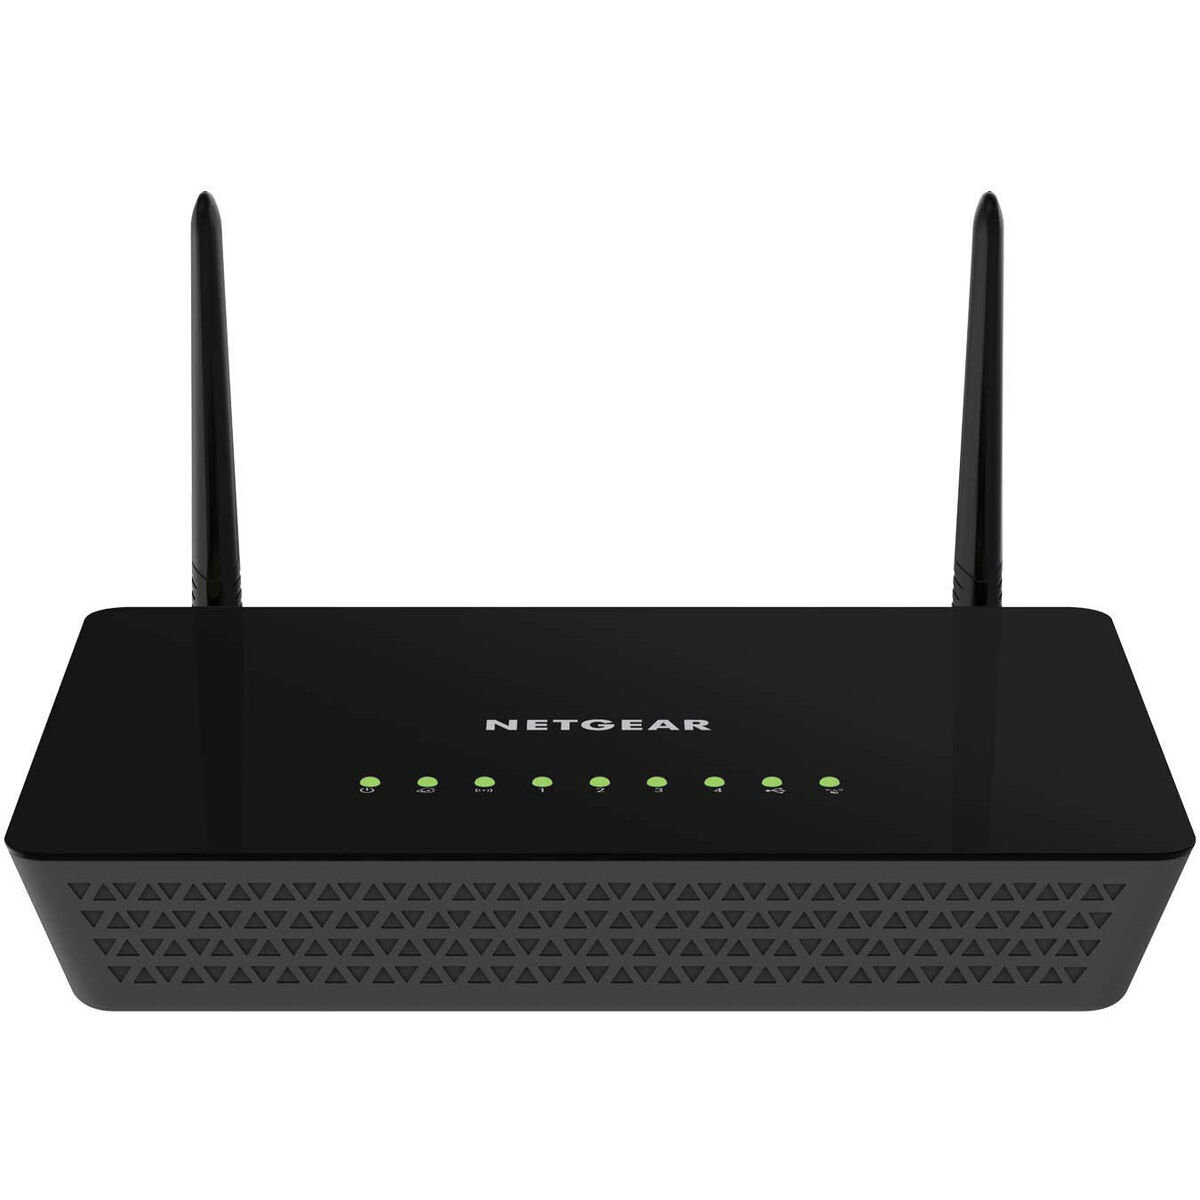 How To Childproof A Netgear Wireless Router